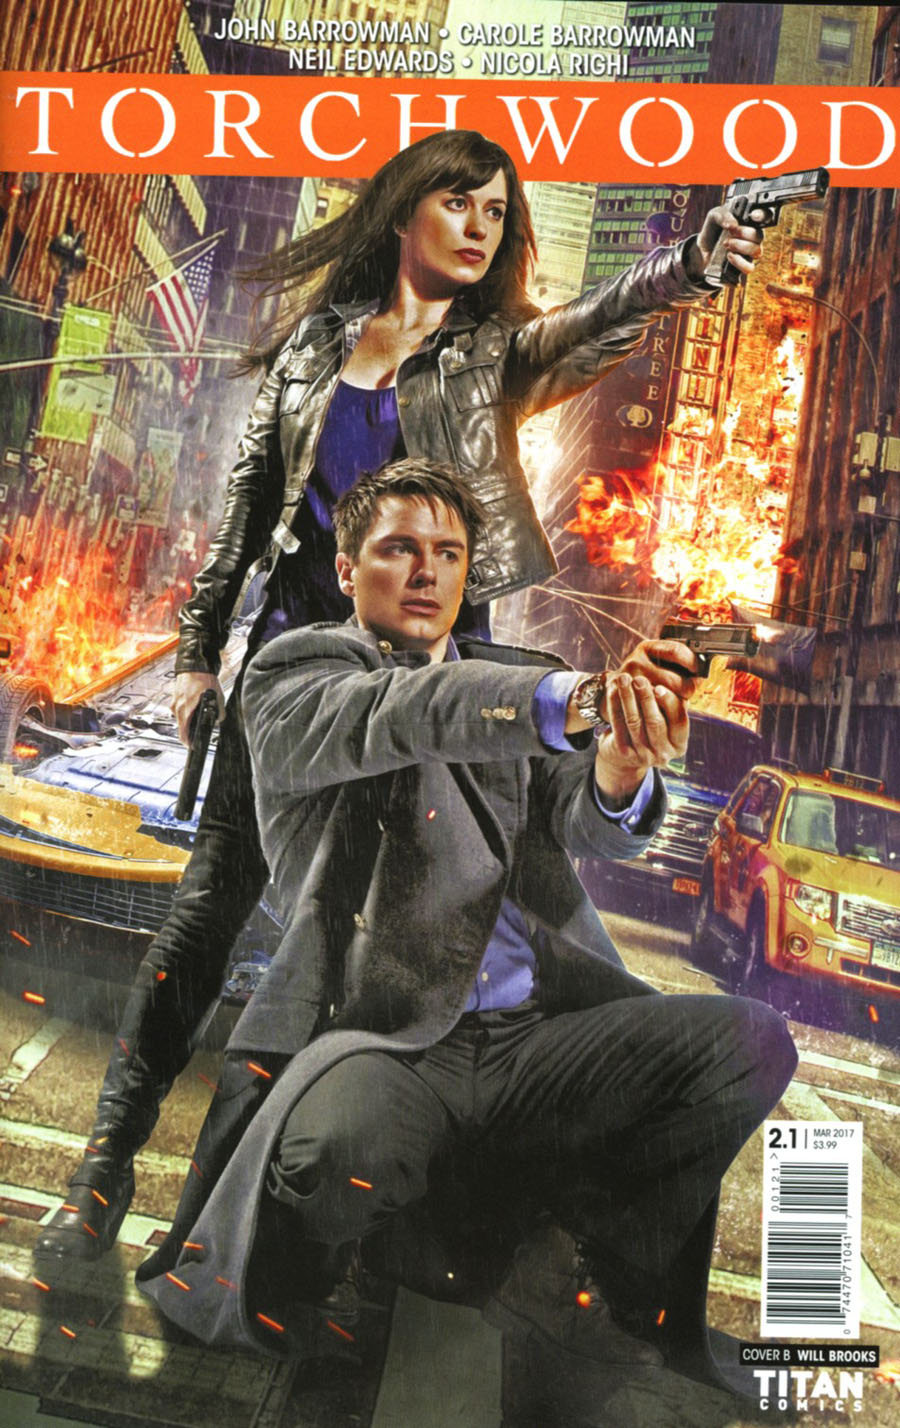 Torchwood Vol 3 #1 Cover B Variant Will Brooks Photo Cover